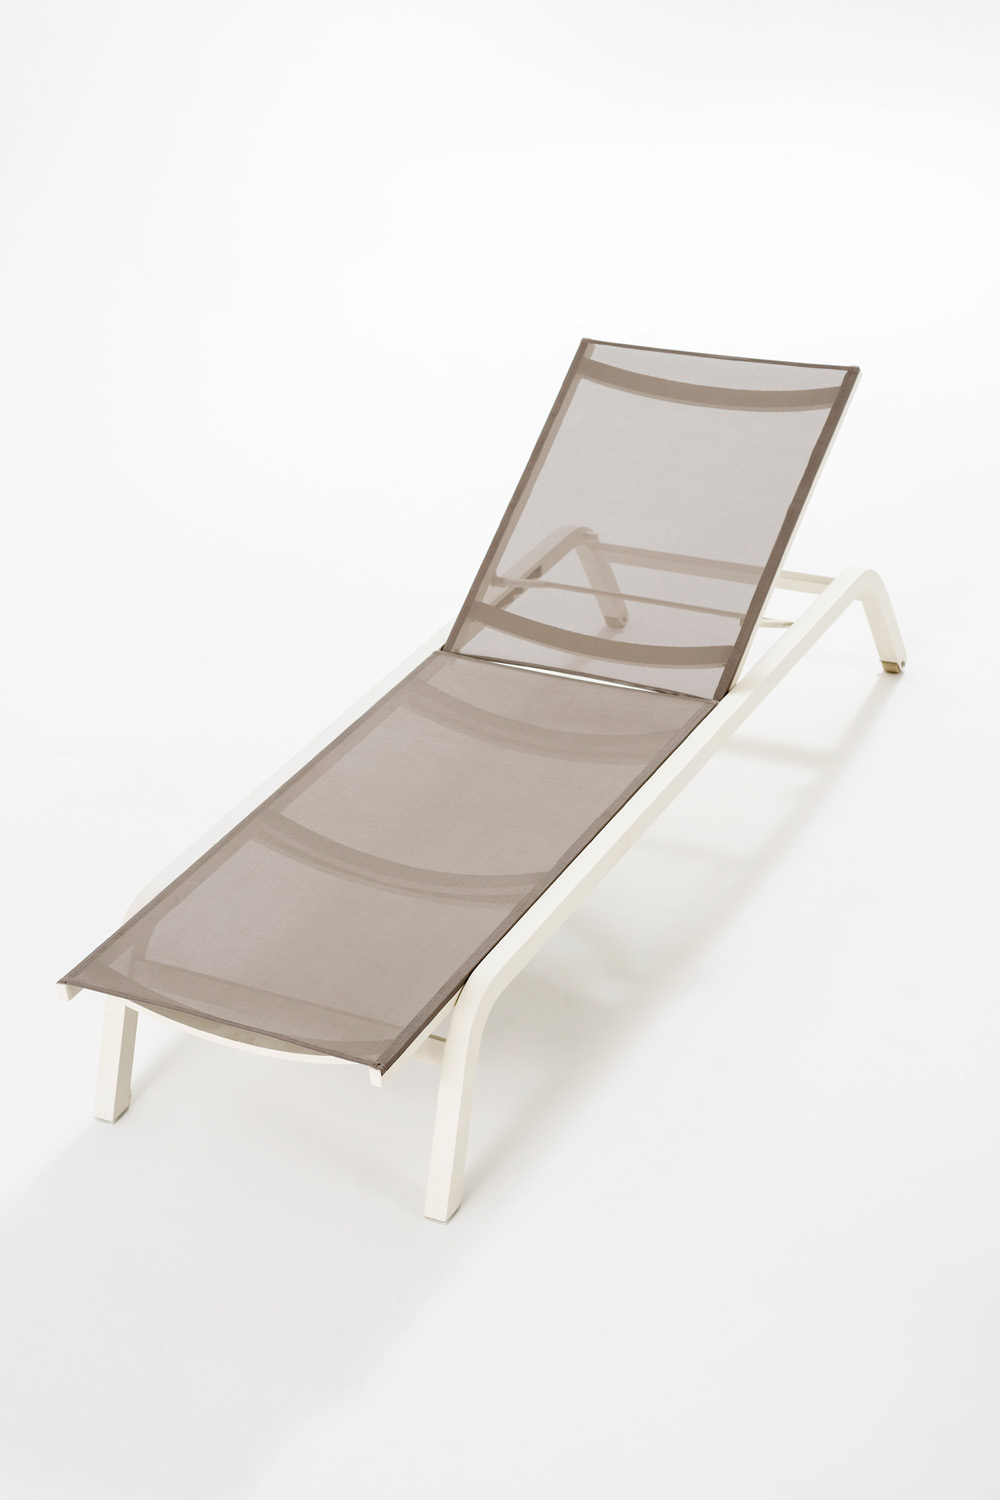 RODA Sun Loungers Daybed Surfer 13